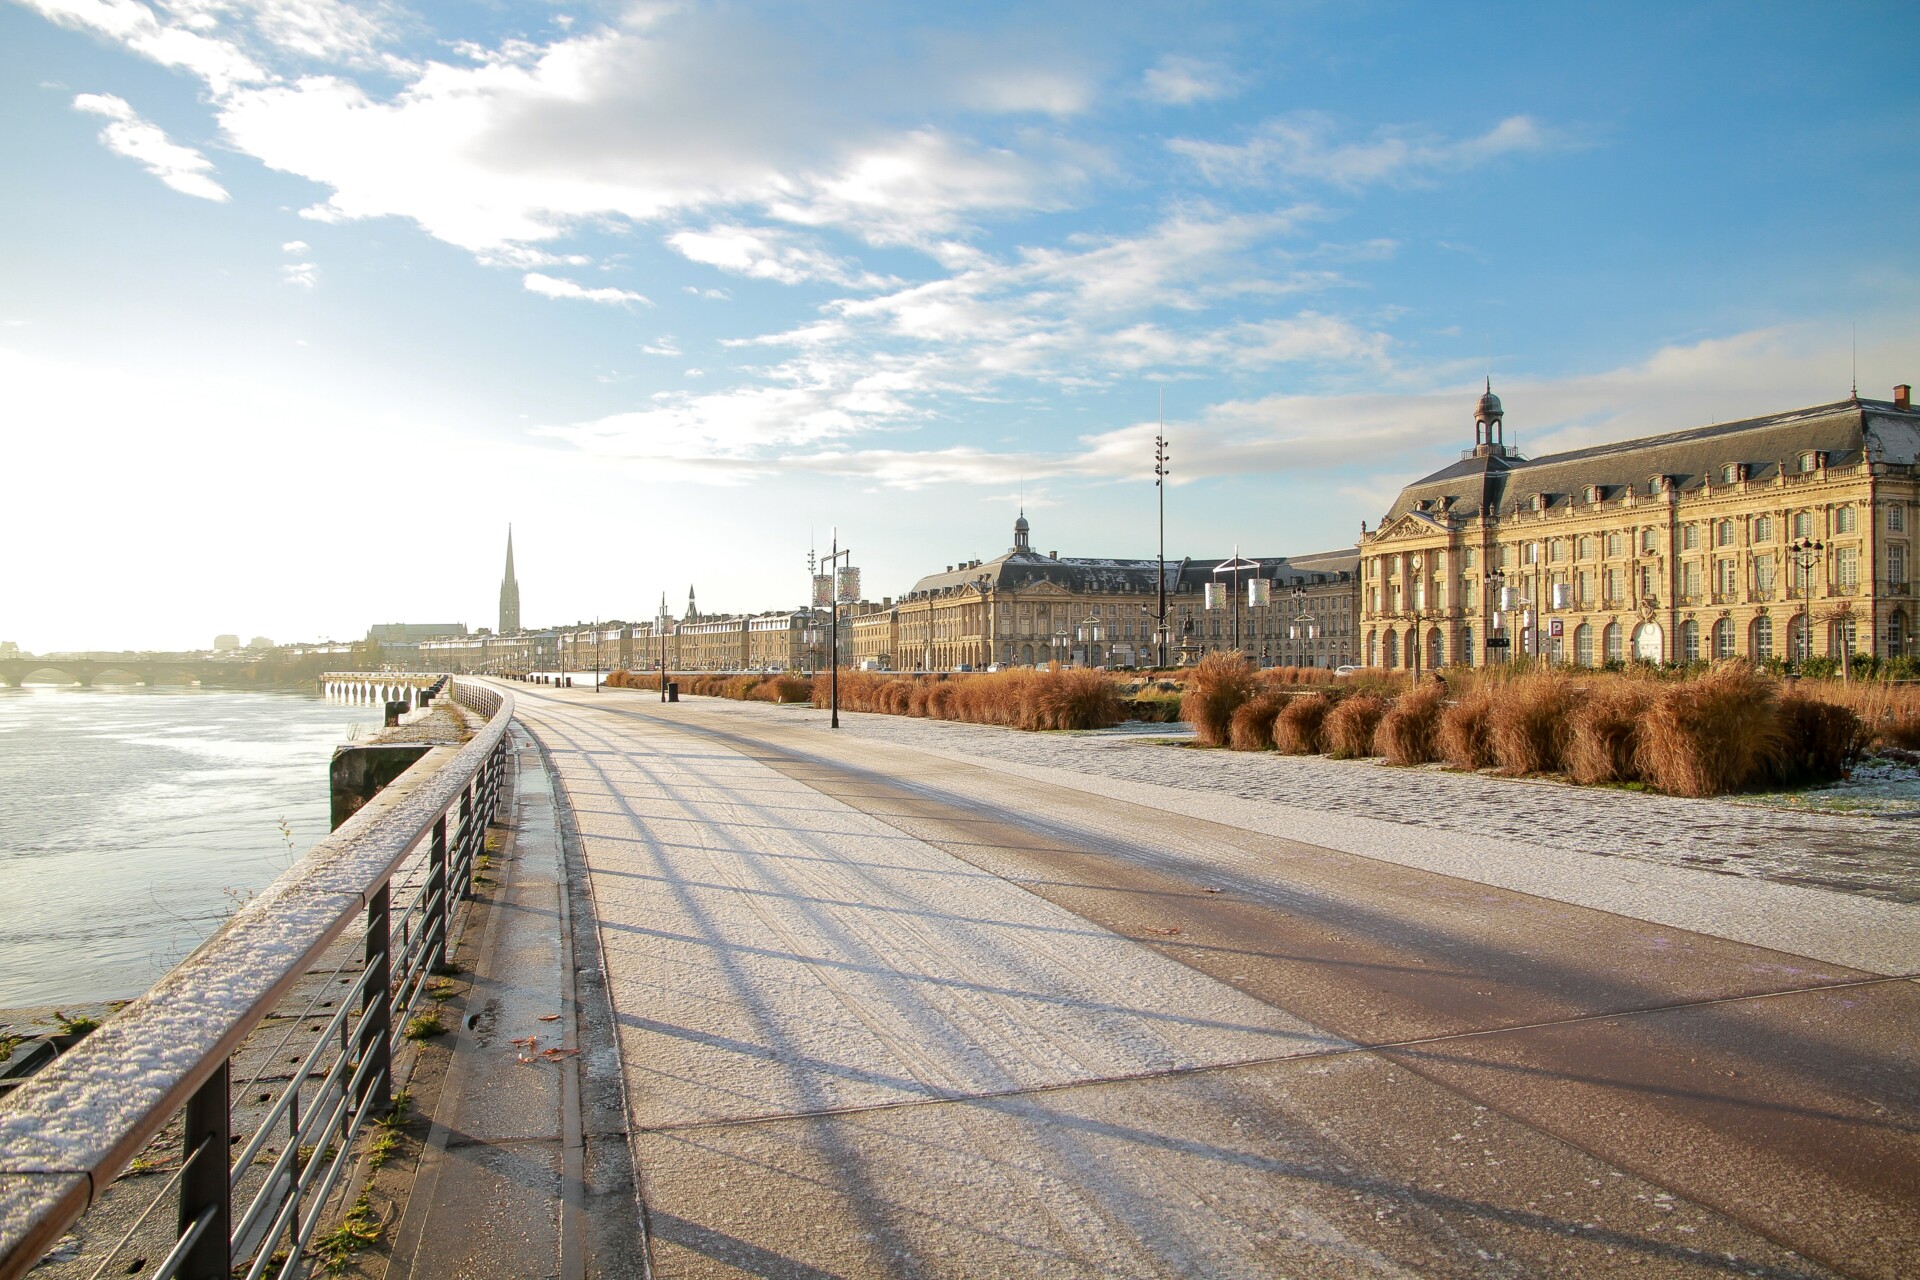 The city of Bordeaux as the sun is rising